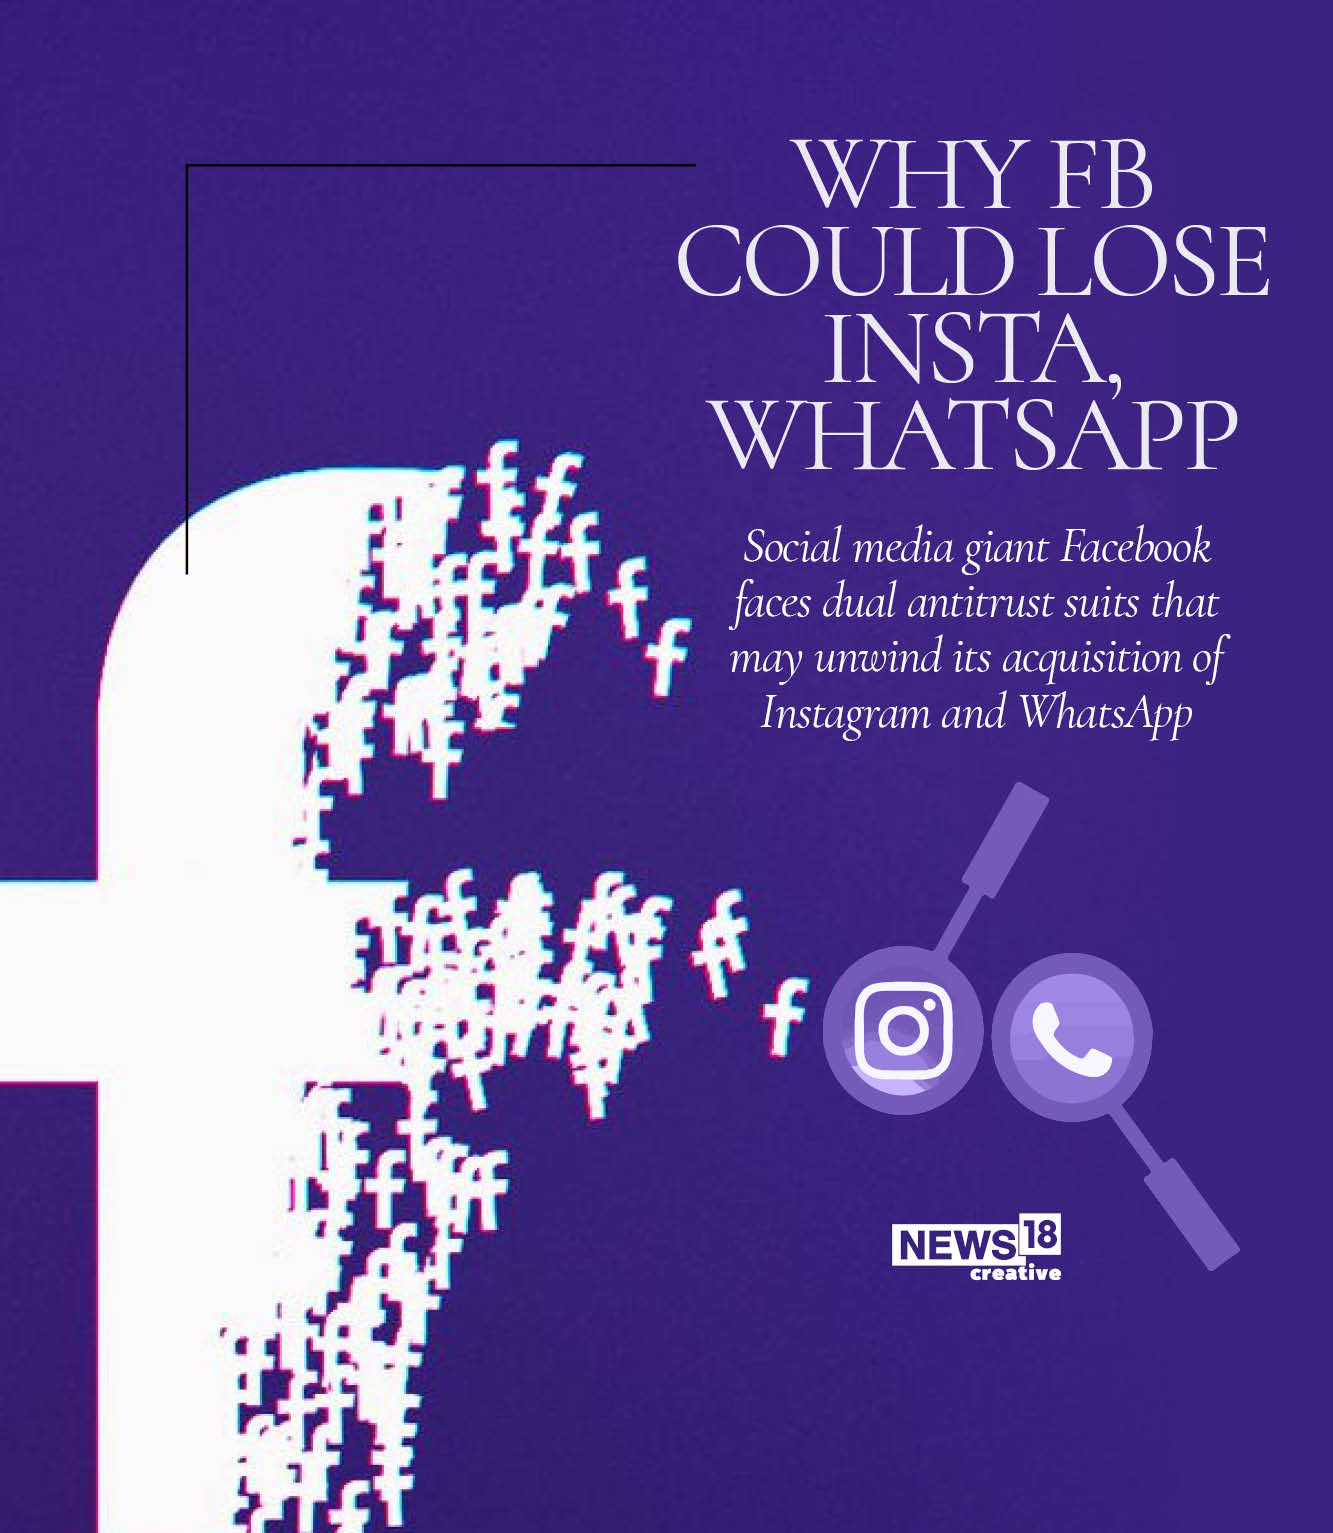 EXPLAINED: Why Facebook could lose Instagram, WhatsApp